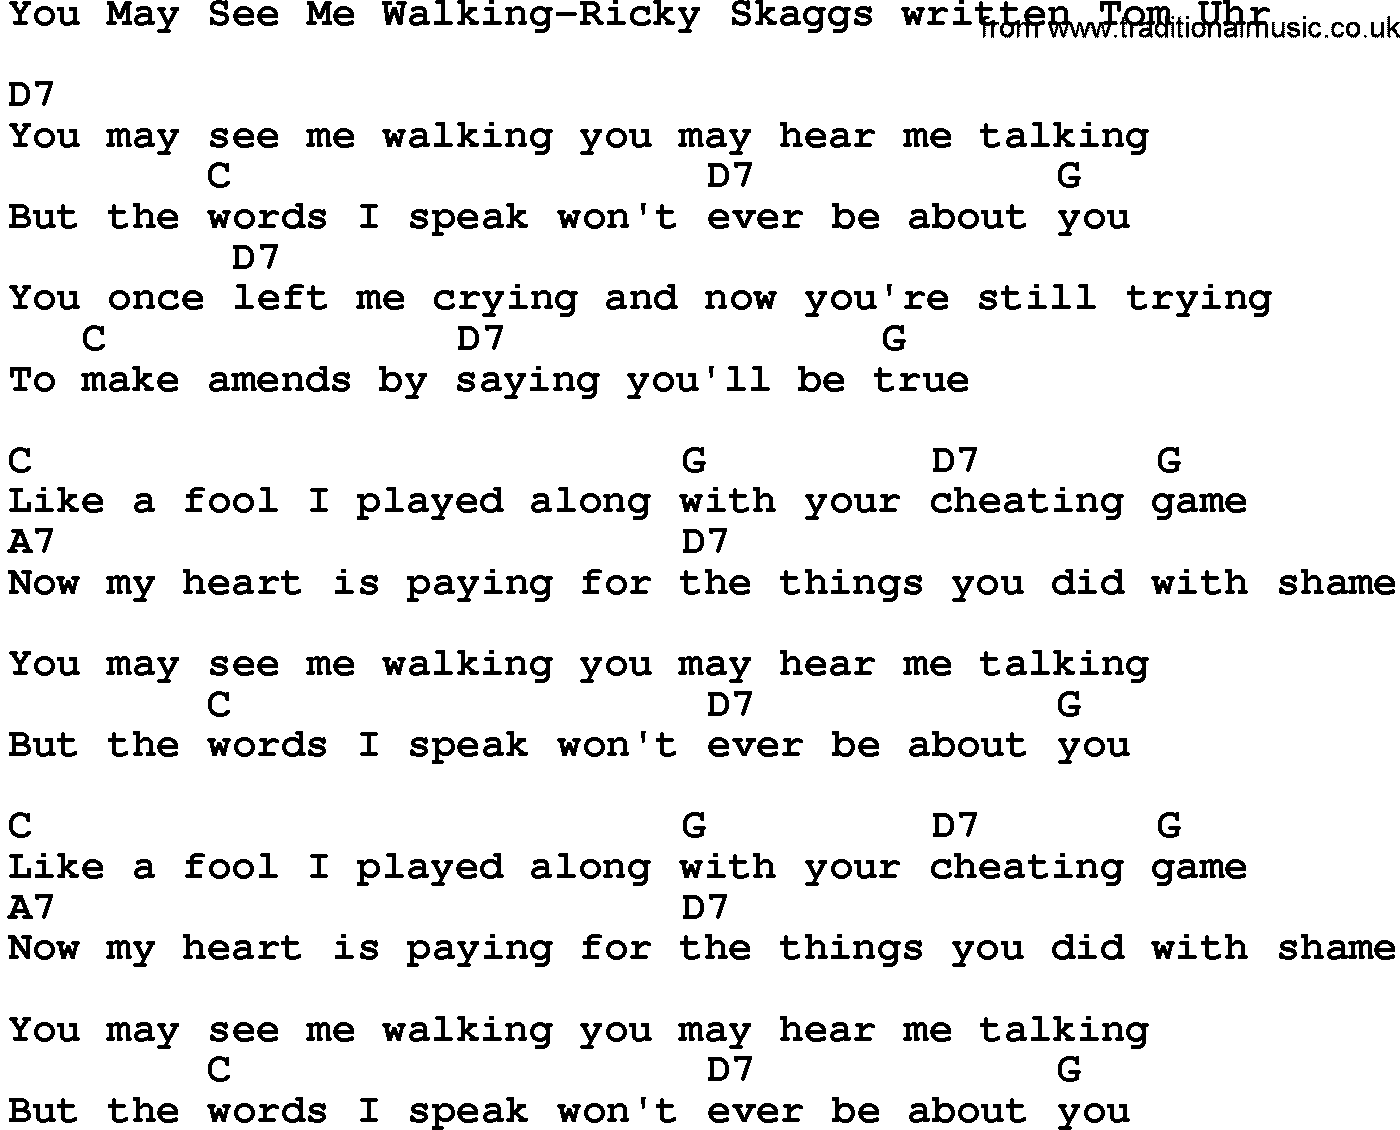 Country music song: You May See Me Walking-Ricky Skaggs Written Tom Uhr lyrics and chords